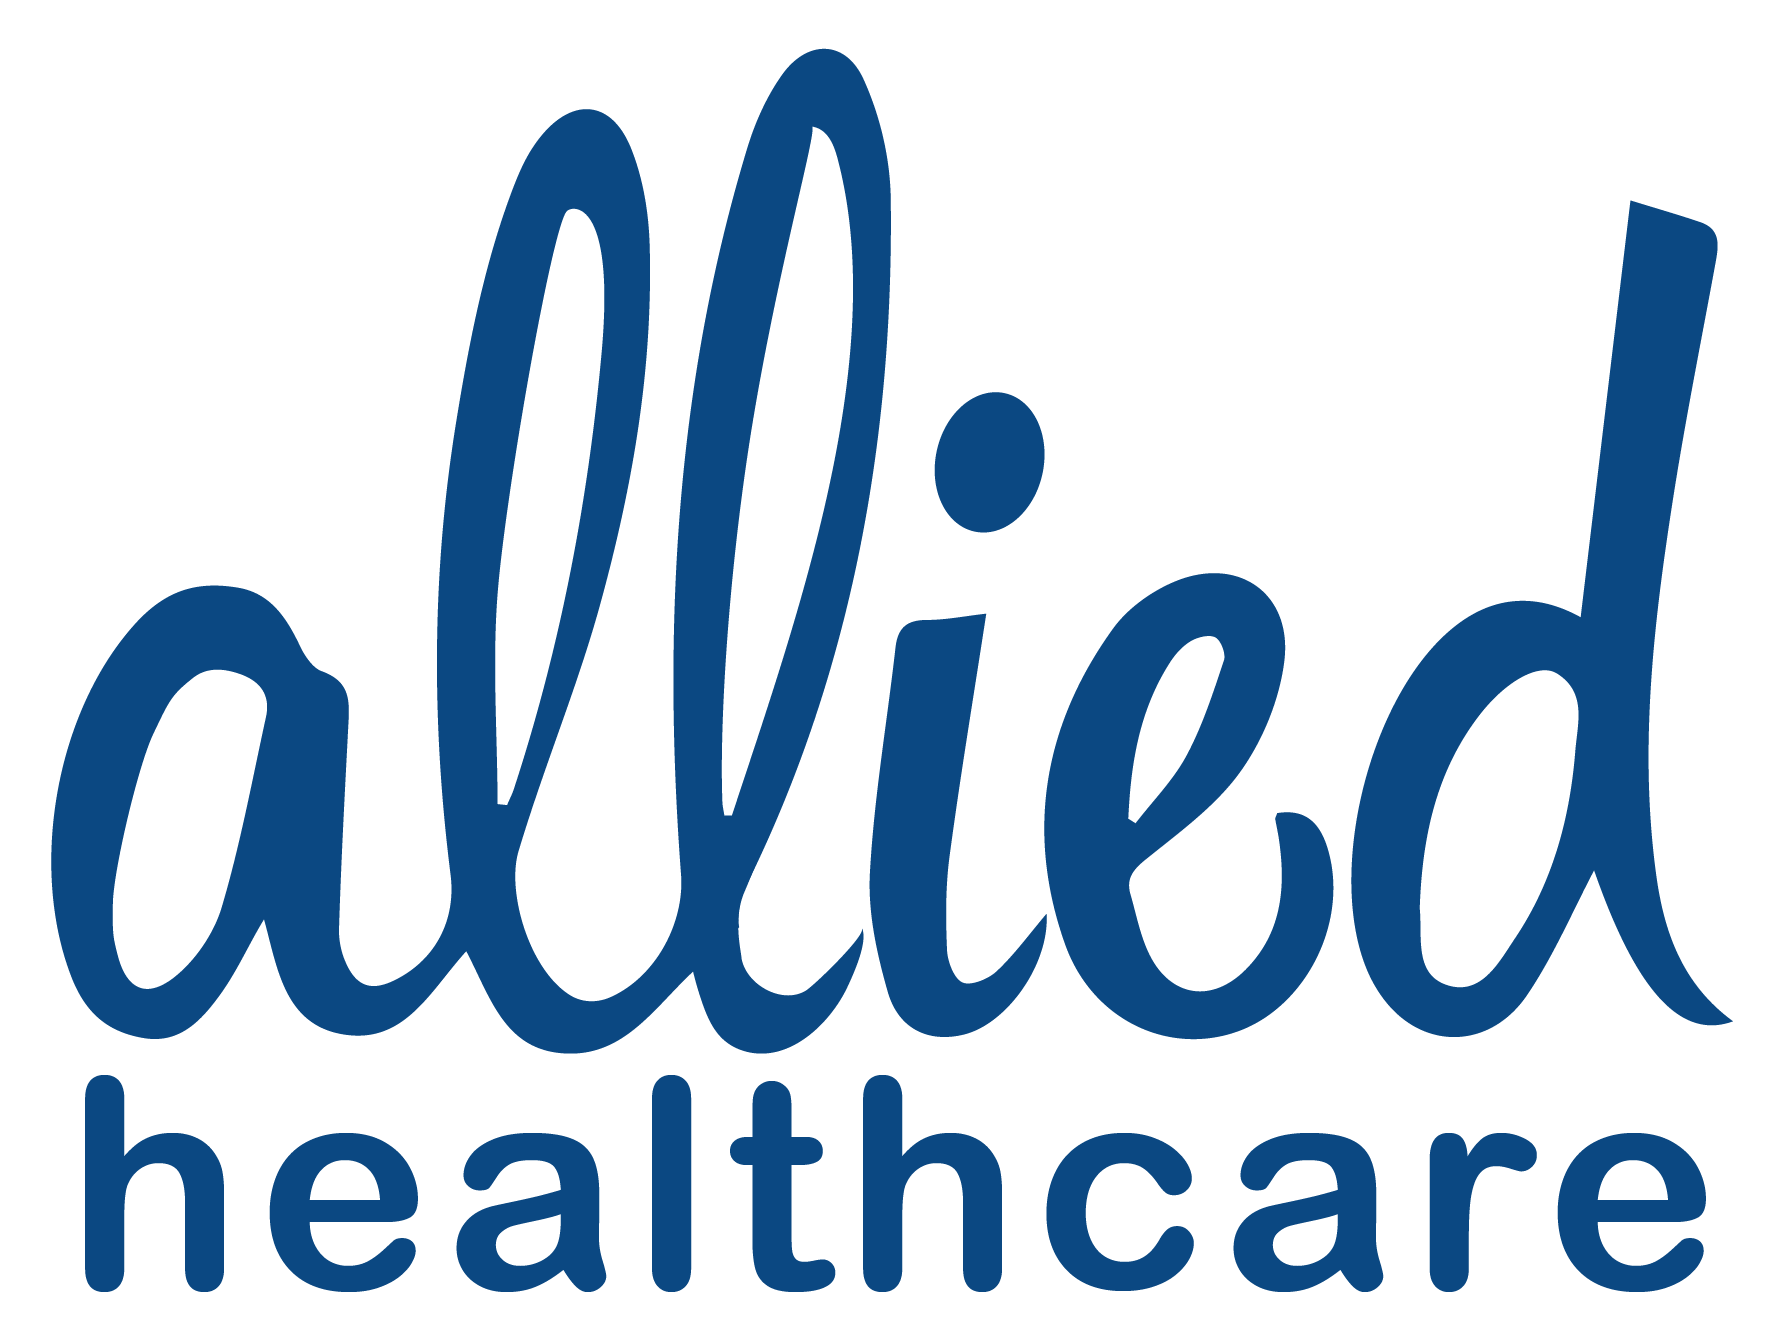 Health Care Logo - Allied Healthcare | Care and support services to live your life ...